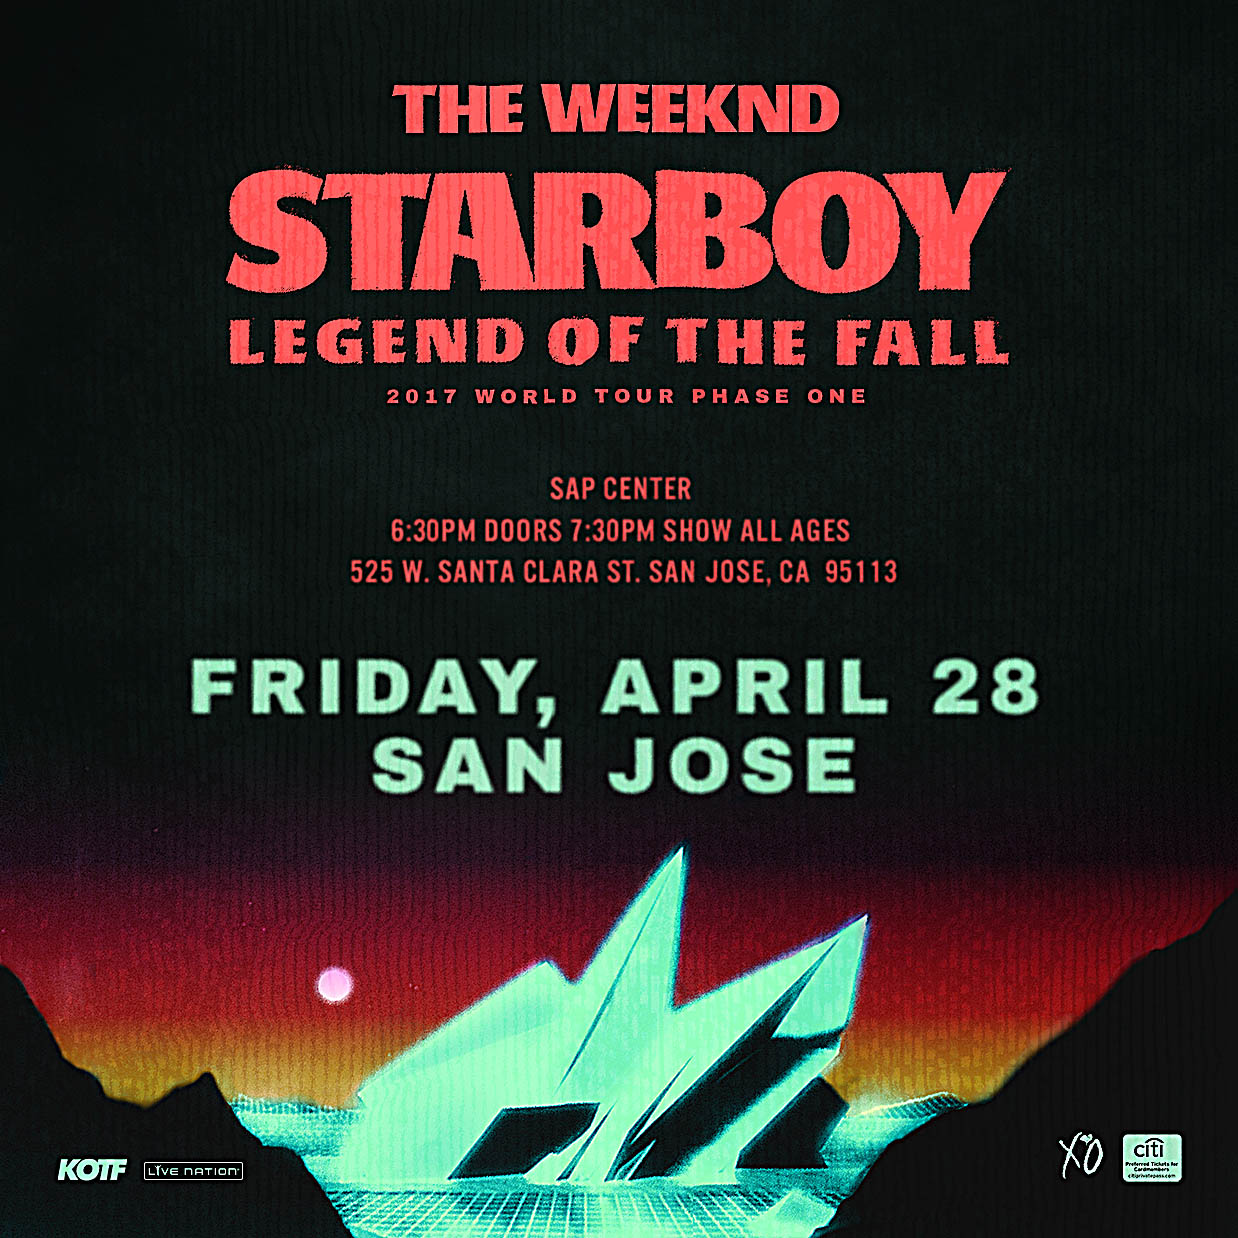 Details about  / 27x40 24x36 Poster The Weeknd 2017 World Tour Starboy Music C-4320